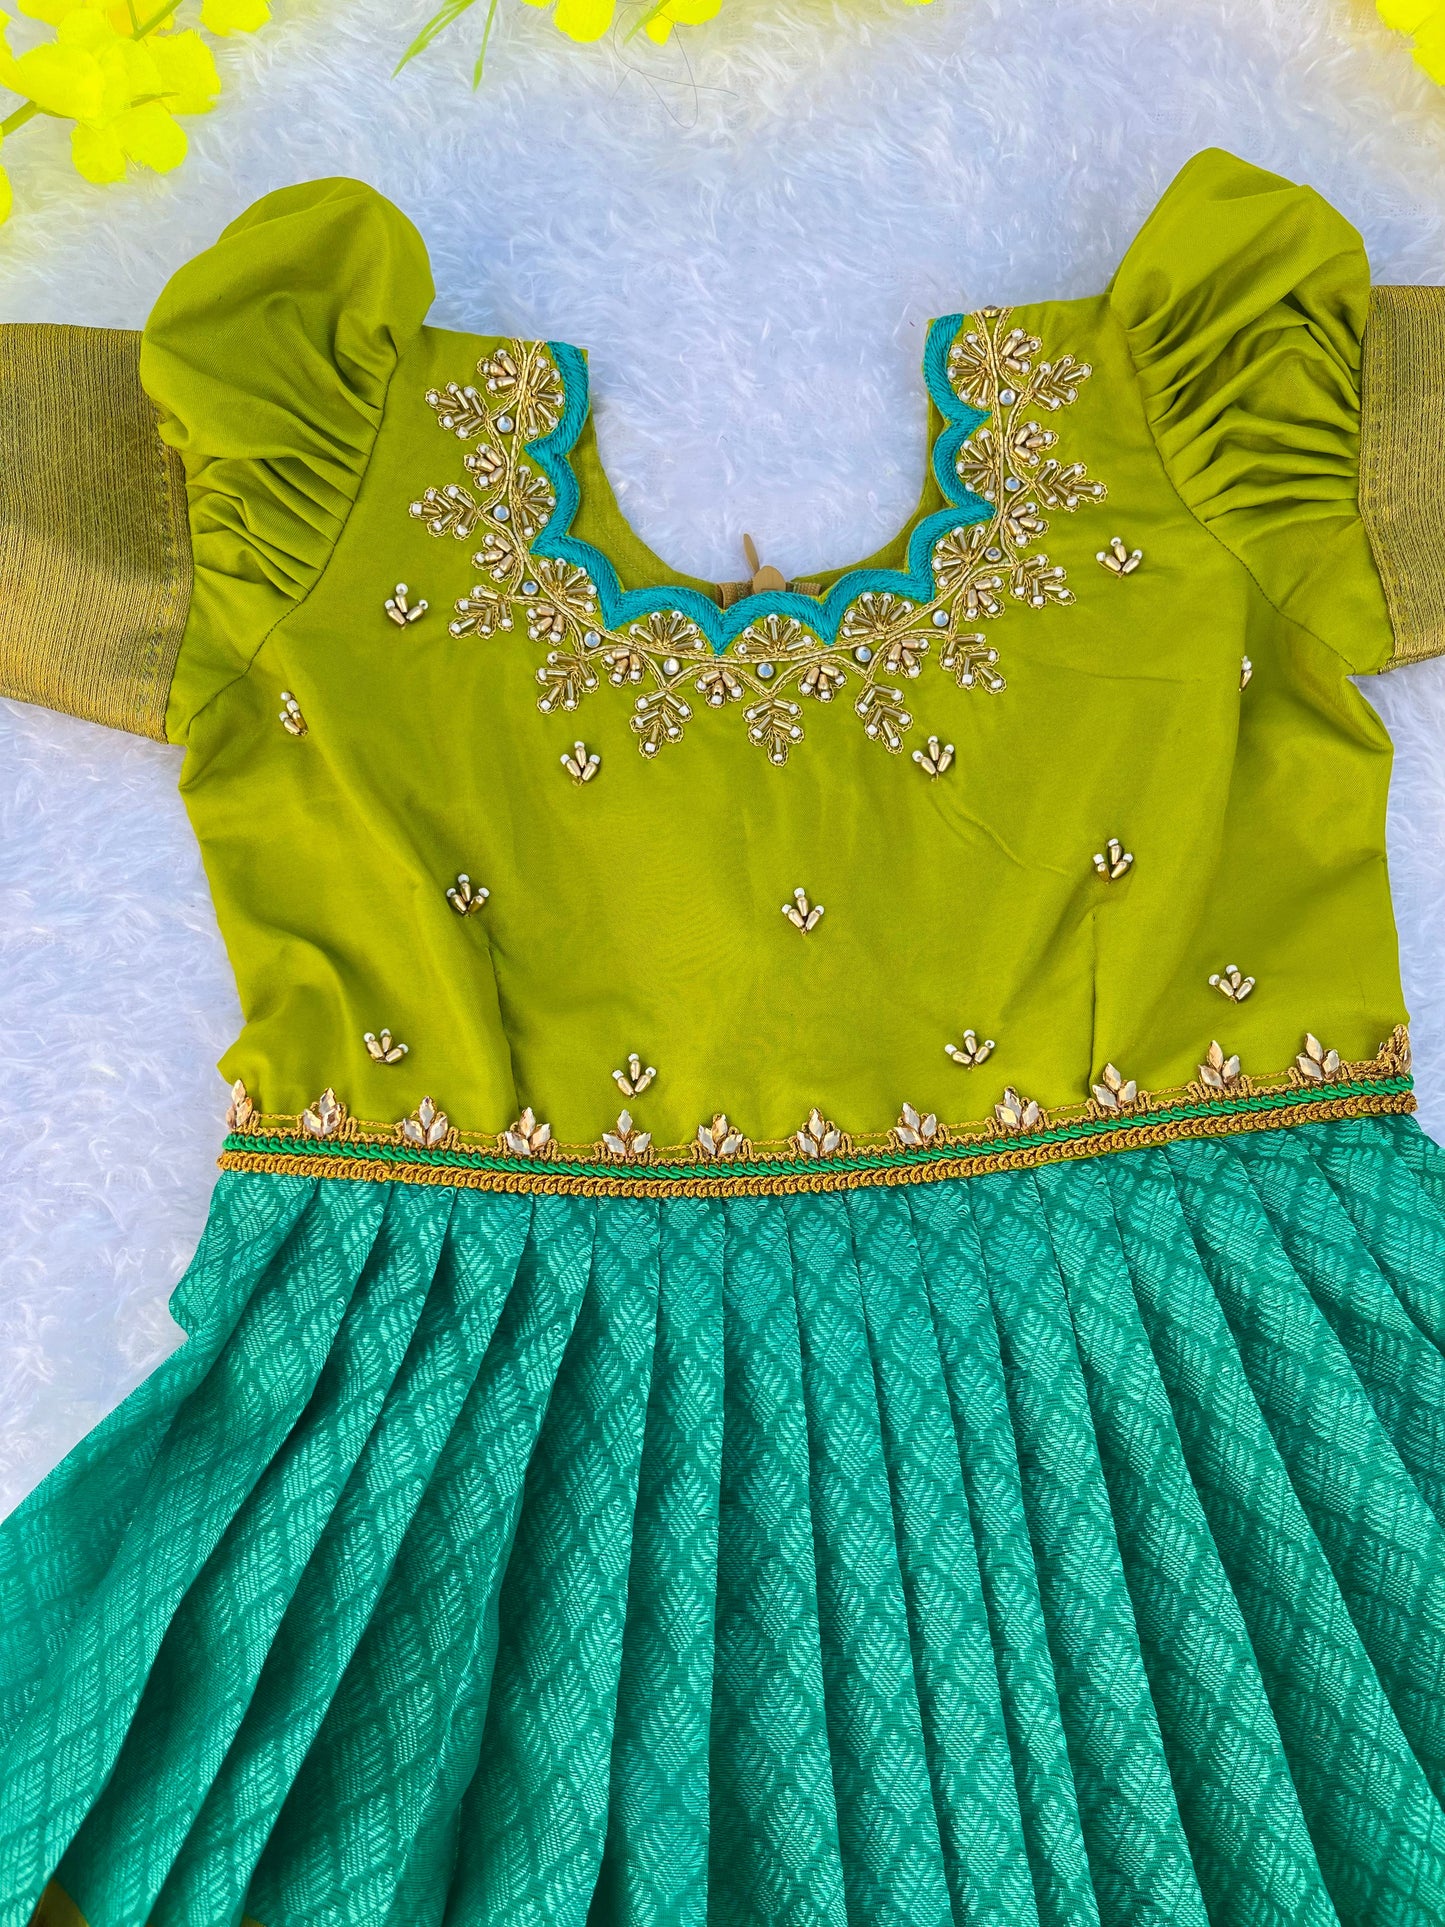 PRE ORDER - Royal Playtime: Elegant Turquoise Pleated Frock for Children